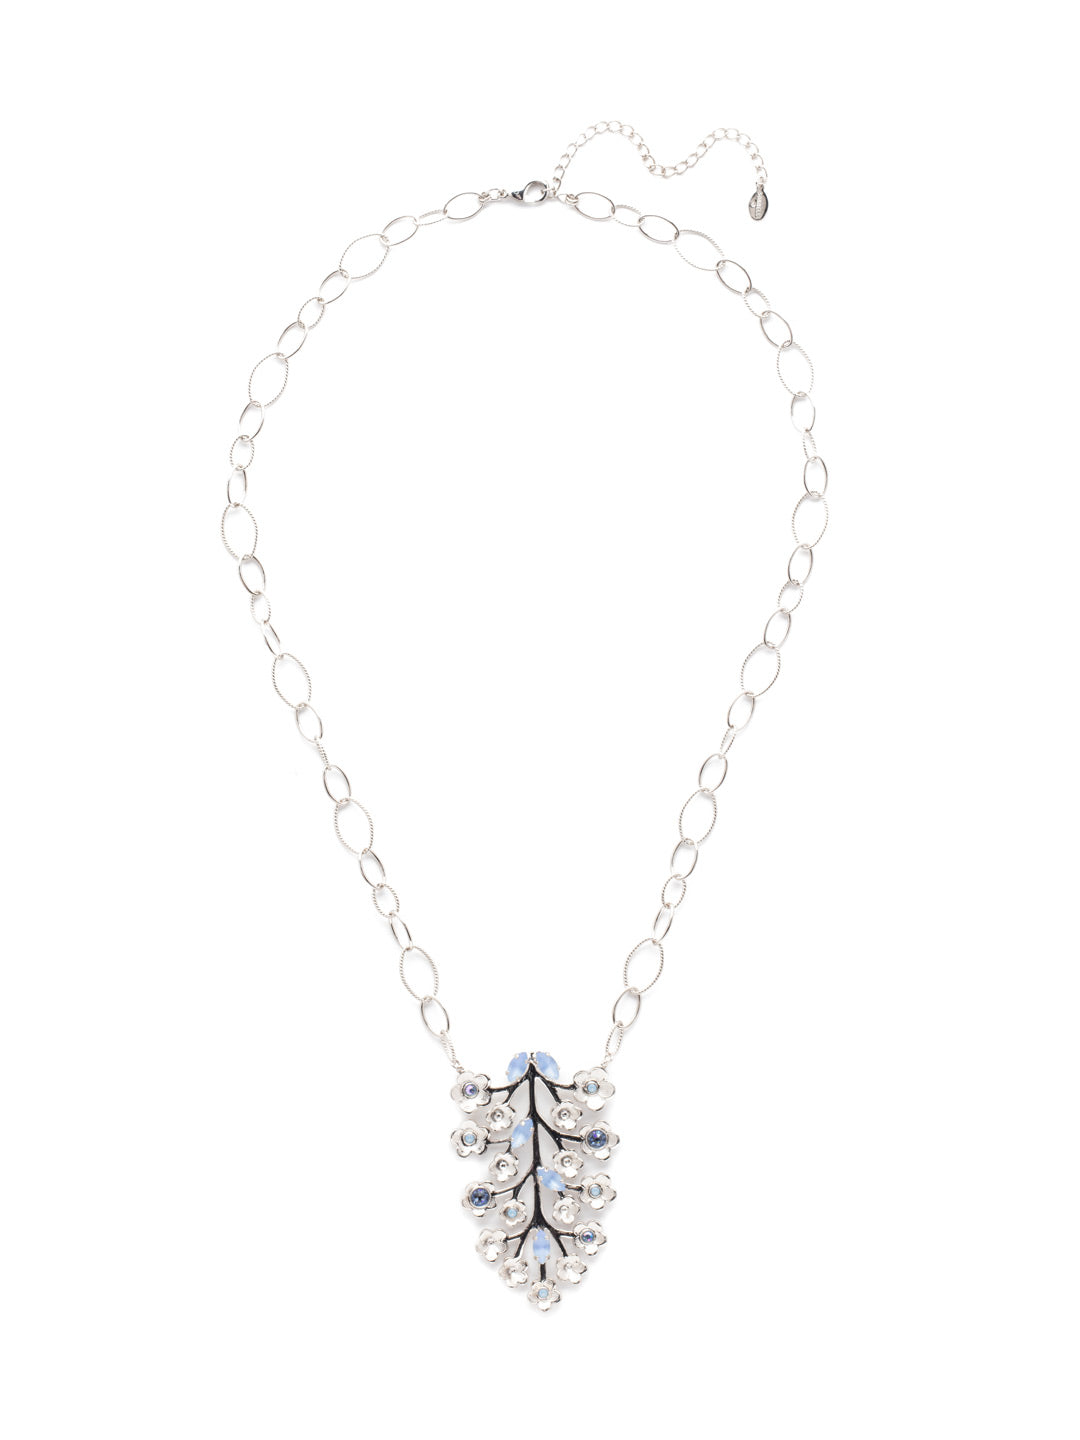 Ambrosia Pendant Necklace - NEV5PDWNB - <p>The Ambrosia Long Pendant Necklace is a beauty. Airy links of metal hold a center Ambrosia leaf accented with sparkling crystals. From Sorrelli's Windsor Blue collection in our Palladium finish.</p>